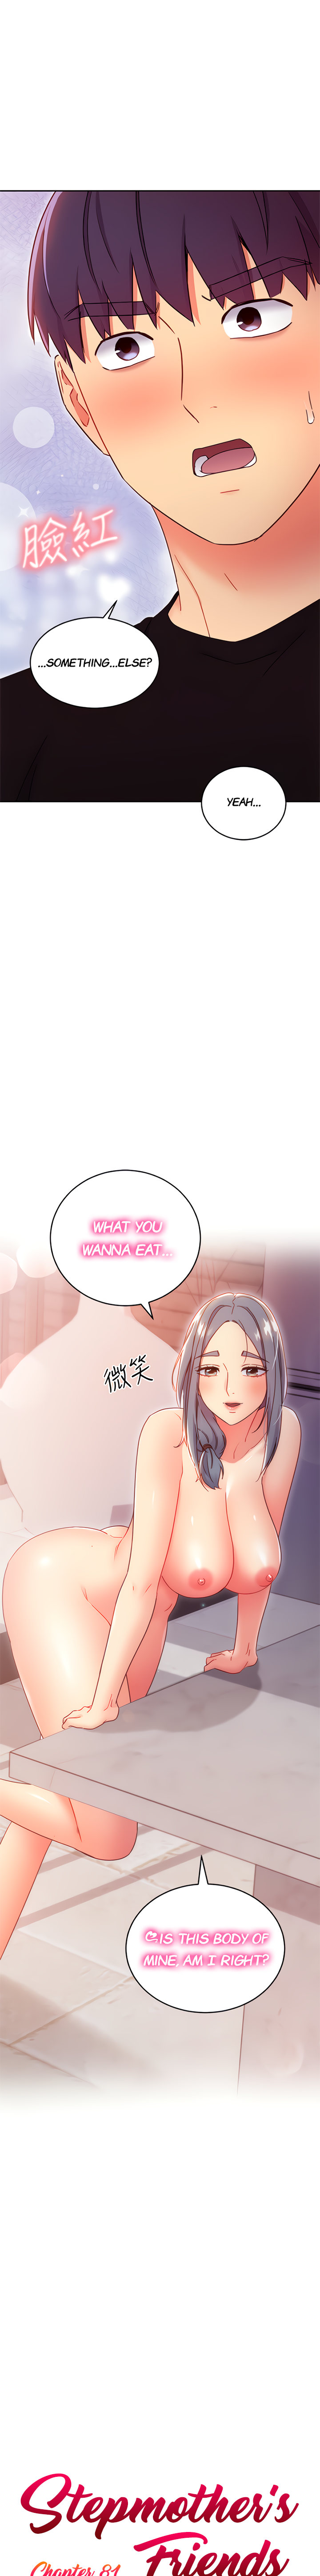 Panel Image 1 for chapter 81 of manhwa Stepmother